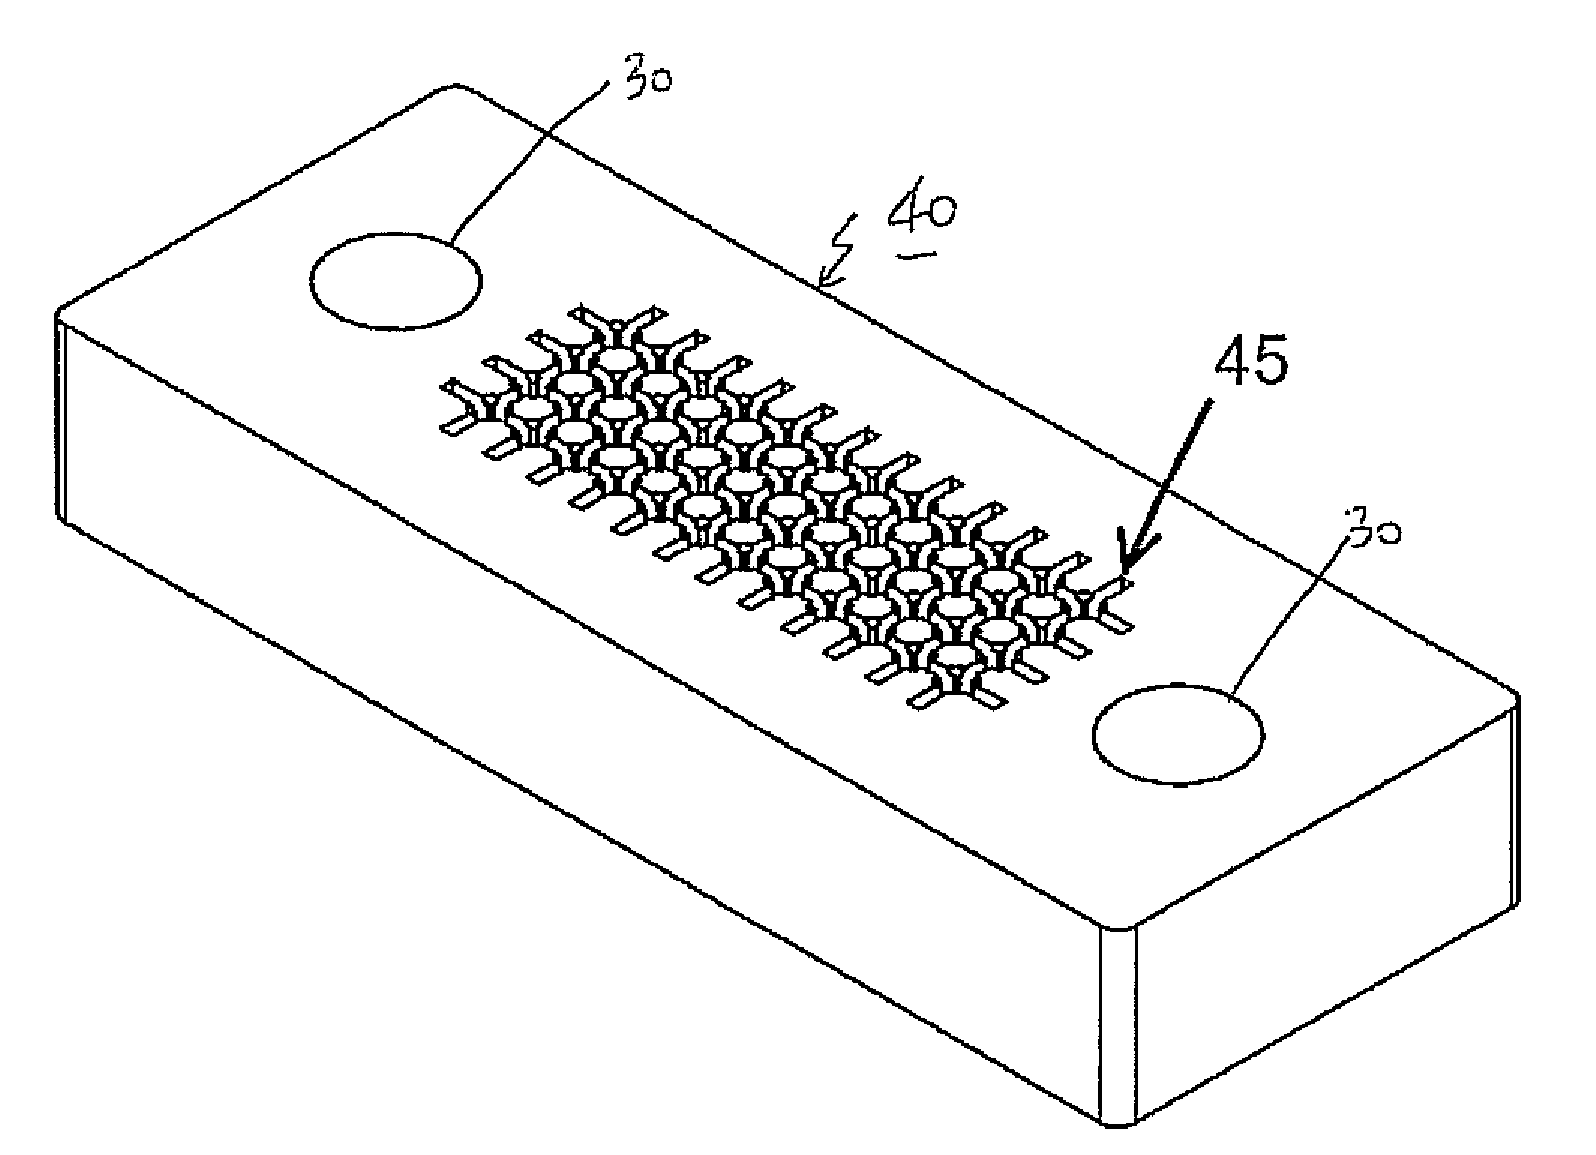 Lensed optical connector with passive alignment features